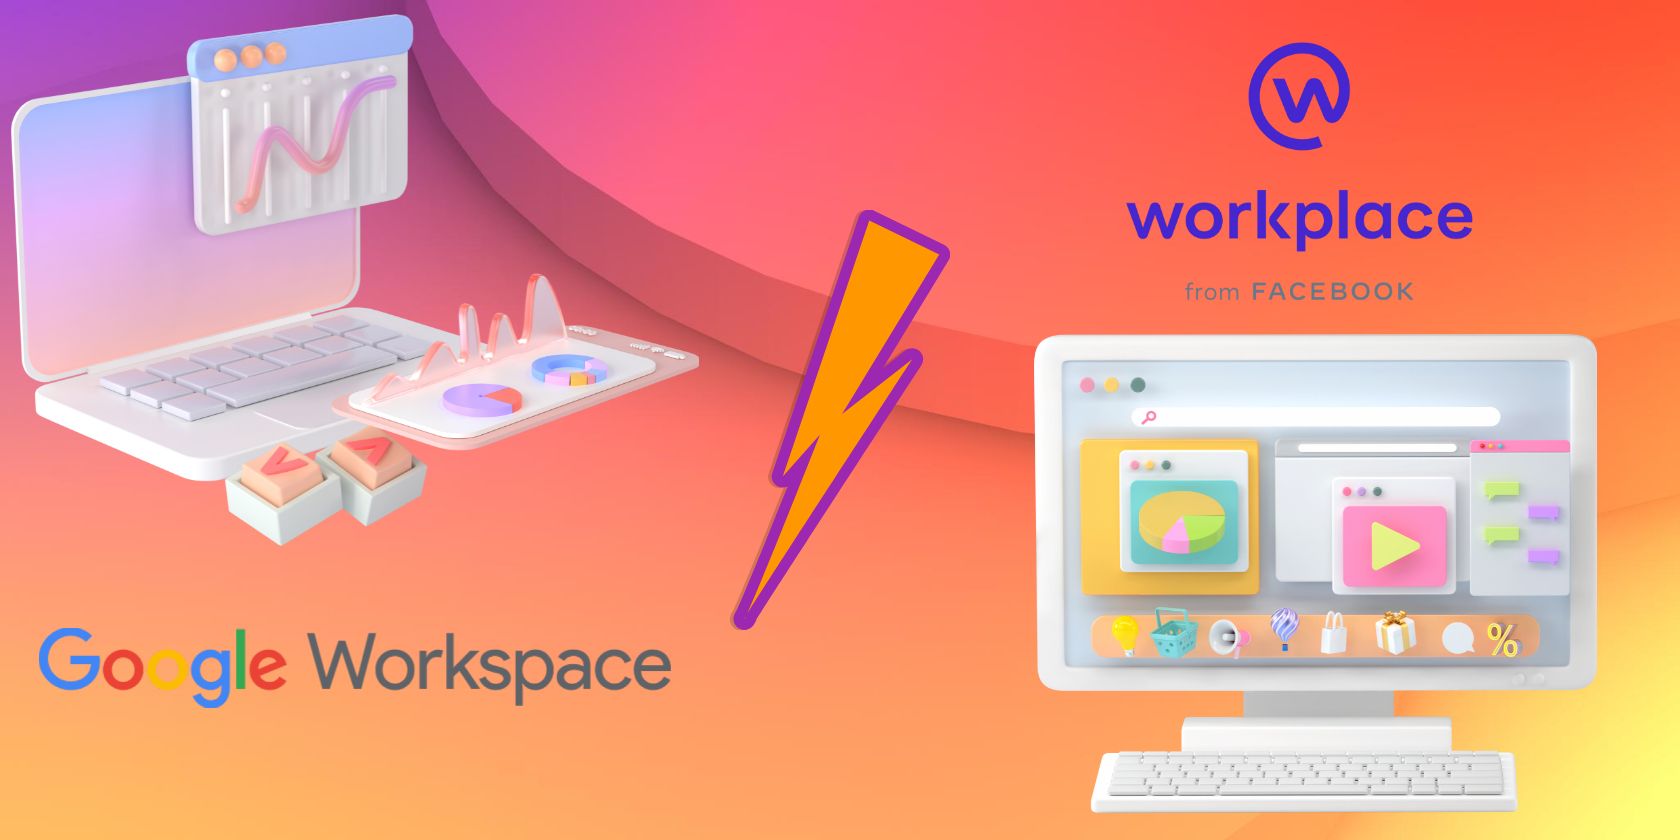 Illustration of Google Workspace Vs Workplace from Facebook 